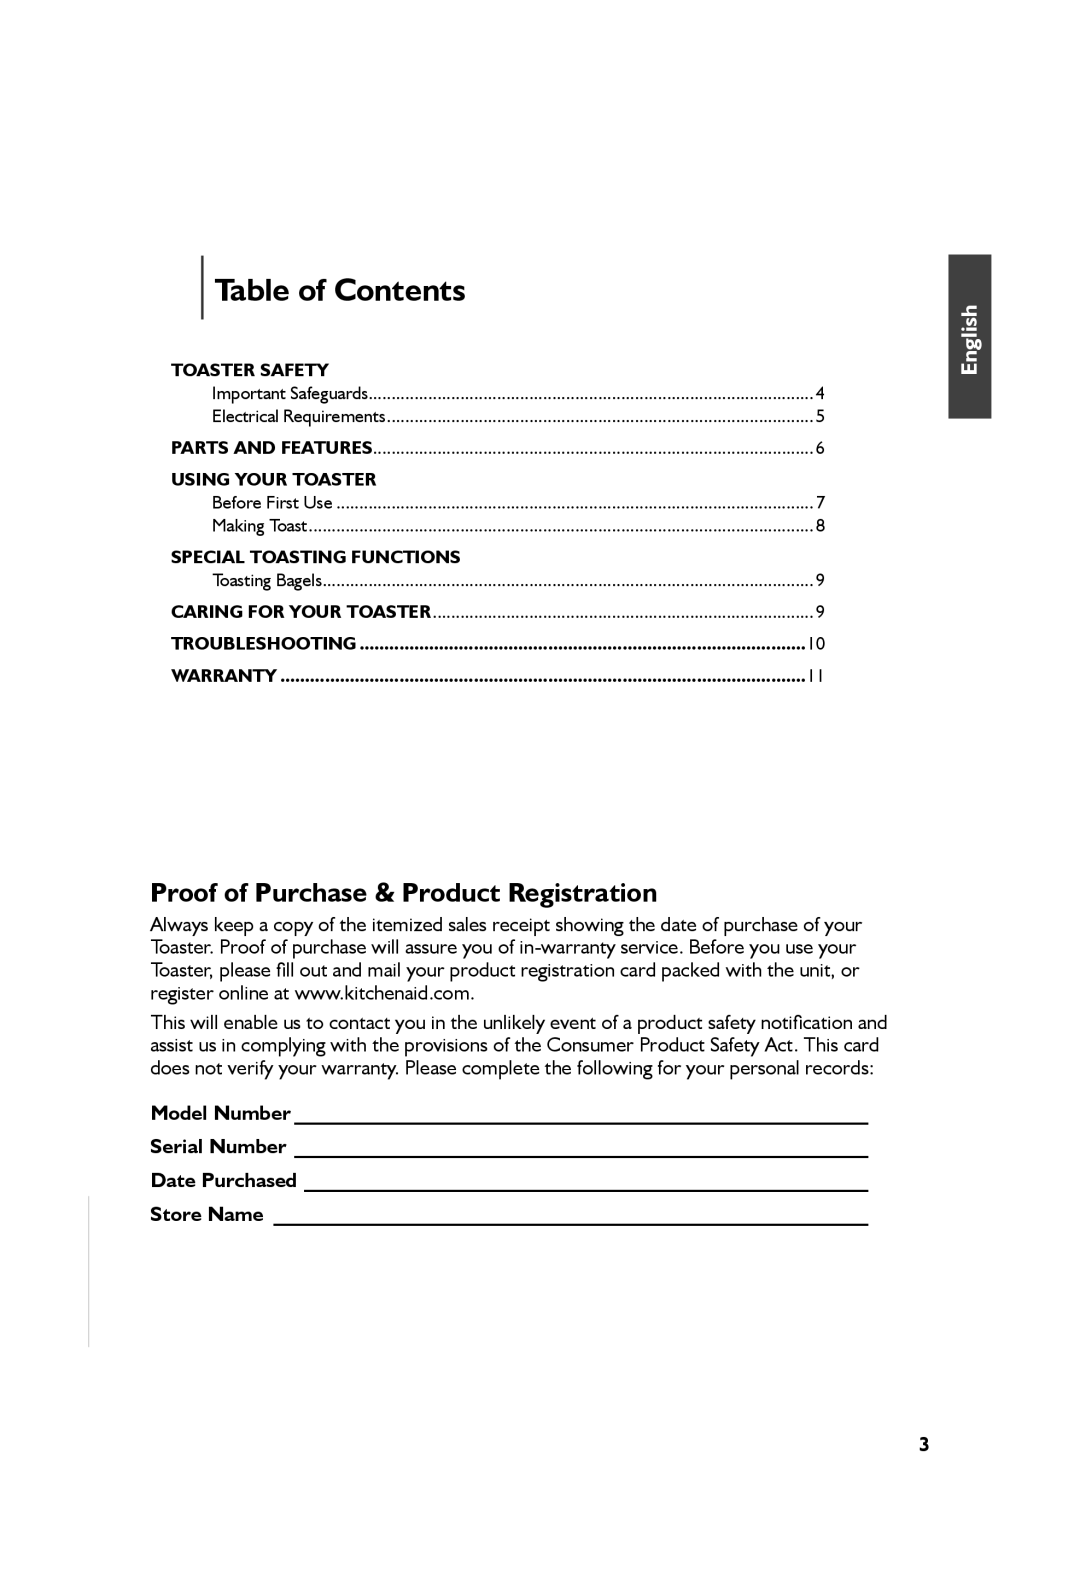 KitchenAid KMT2115, KMT4115 manual Table of Contents, Proof of Purchase & Product Registration, English 